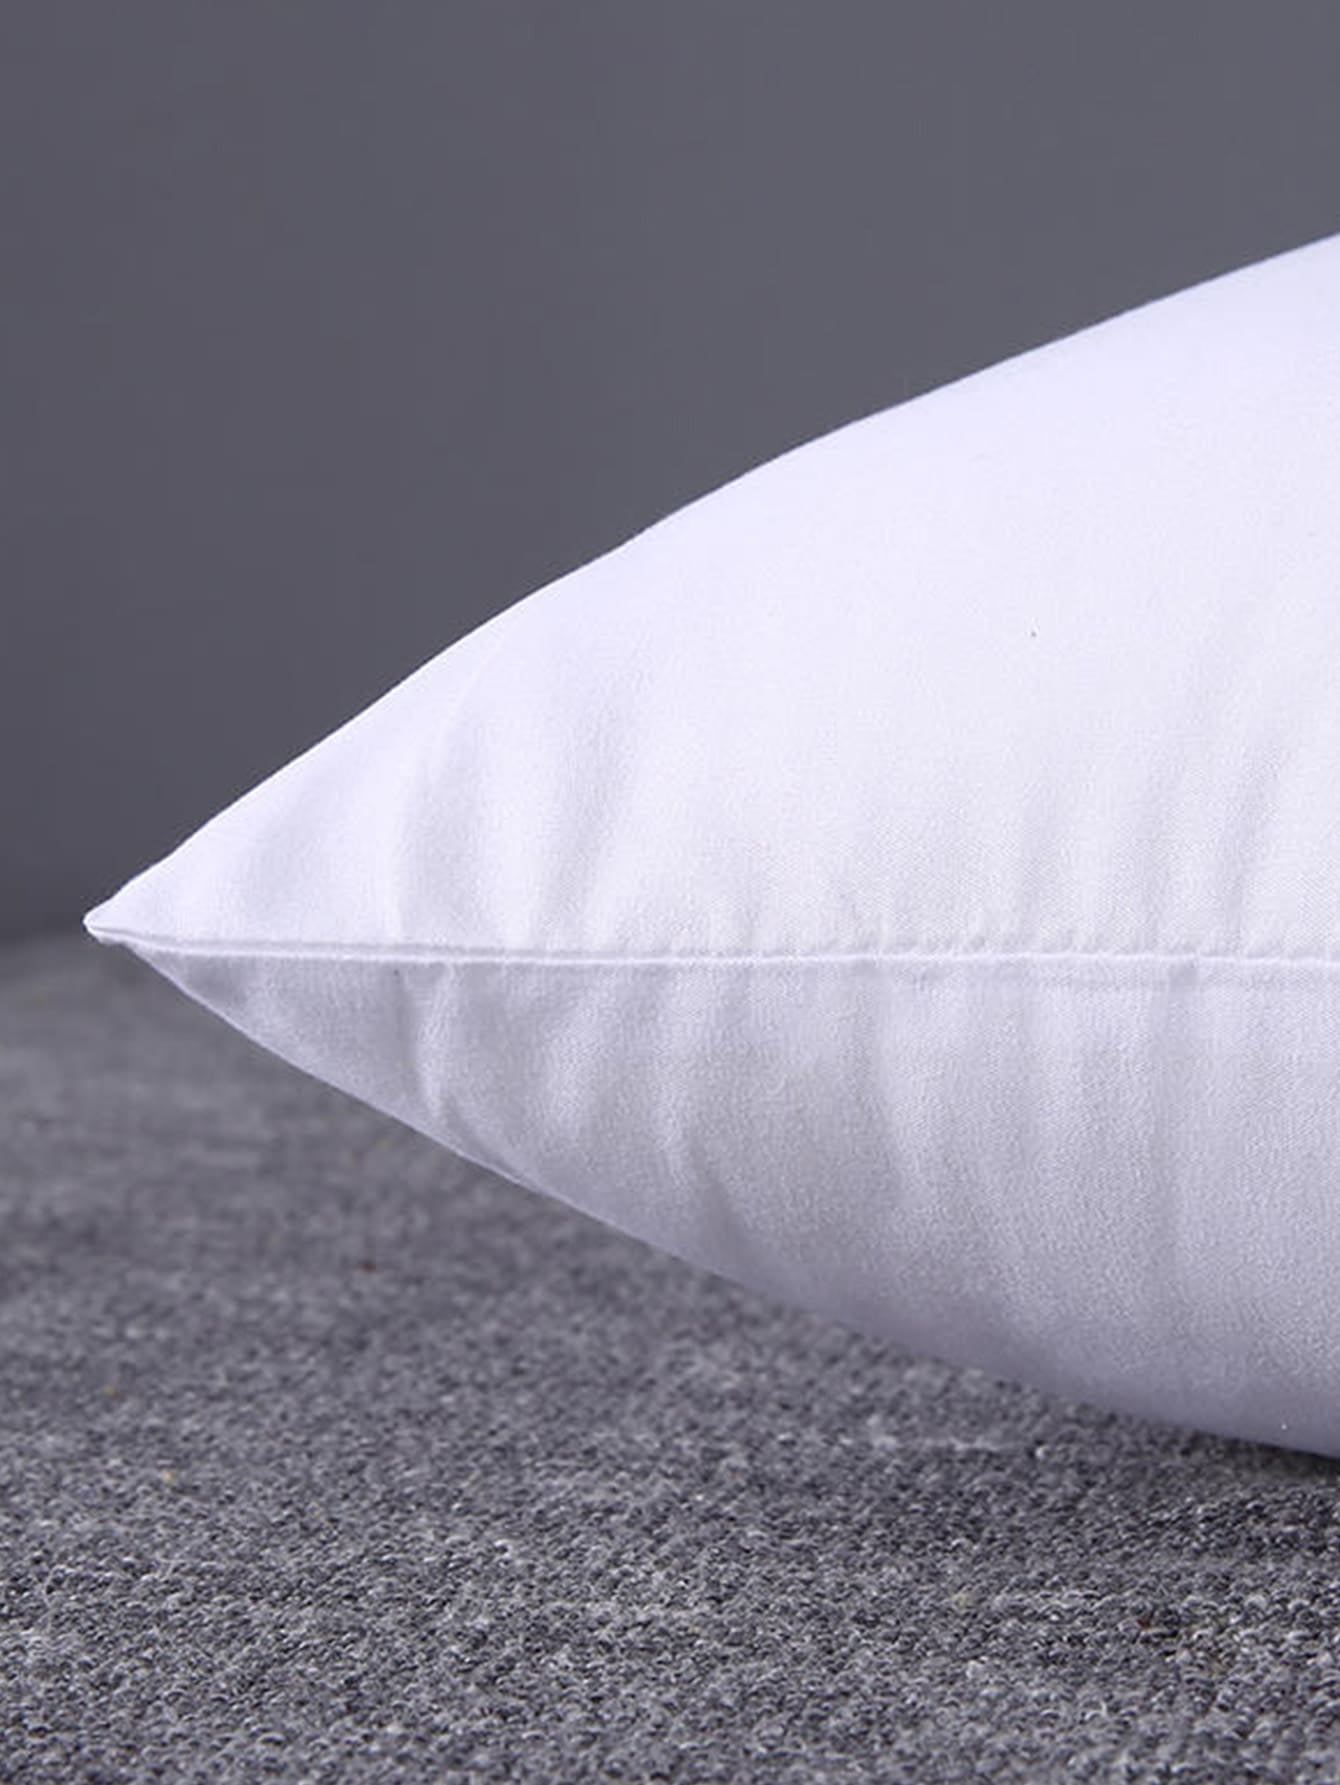 1Pc Solid Color White Decorative Pillow, Modern Polyester Multifunction Decorative Pillow for Home